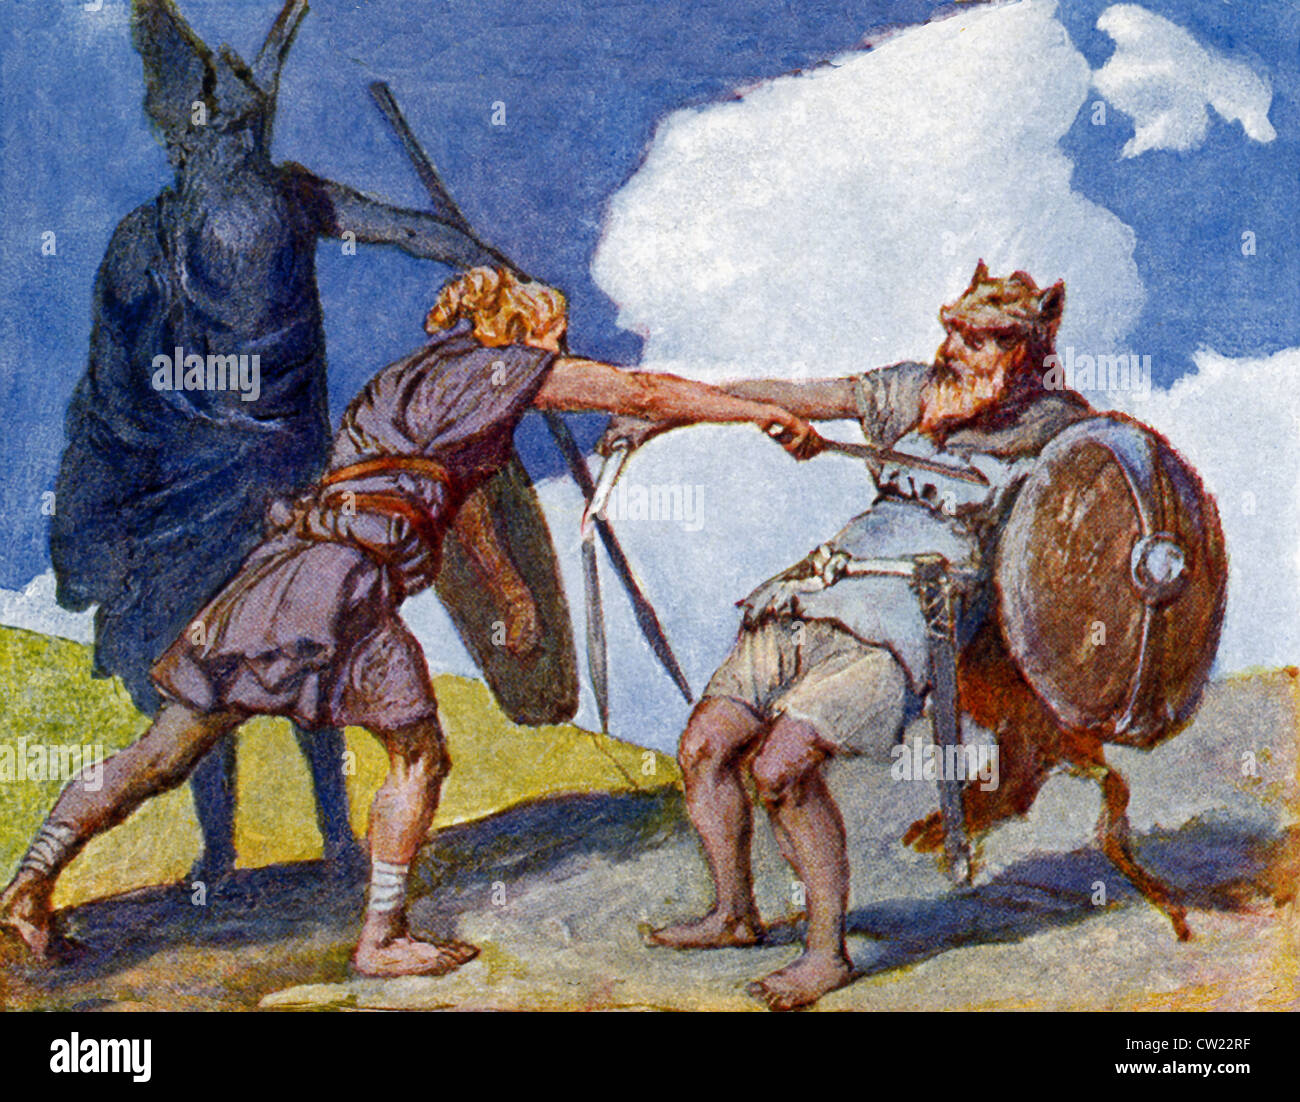 When Sigmund has become a ruler, there is a battle and Sigmund is matched against an old man who is Odin in disguise. Stock Photo